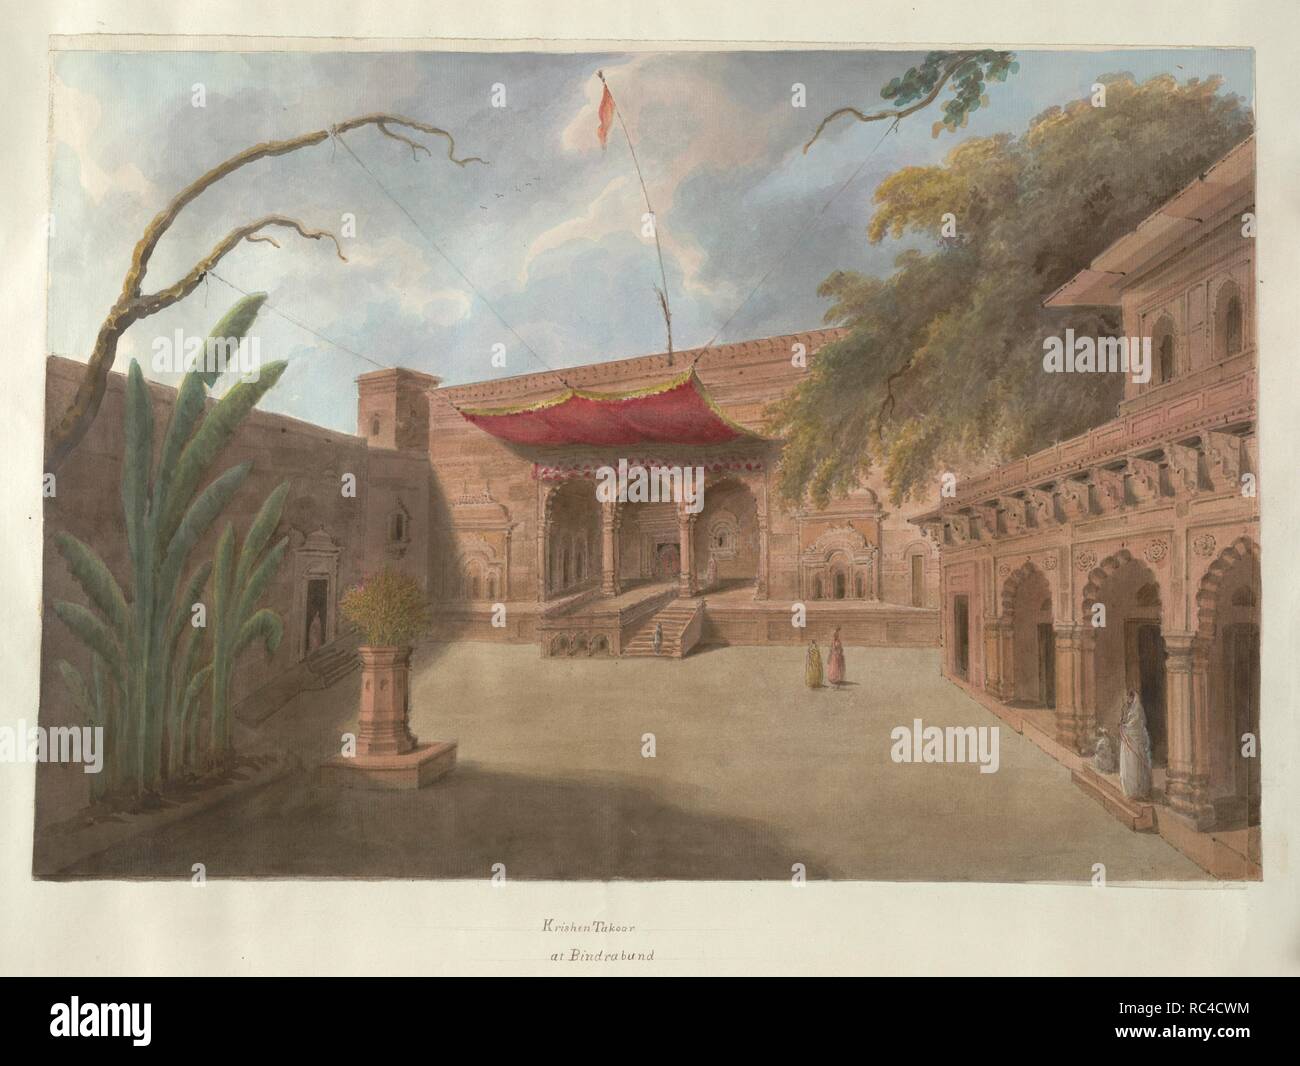 Courtyard of a temple at Brindaban. Hastings Albums. 1815. watercolour. Source: Add.Or.4840. Language: English. Author: SITA RAM. Stock Photo